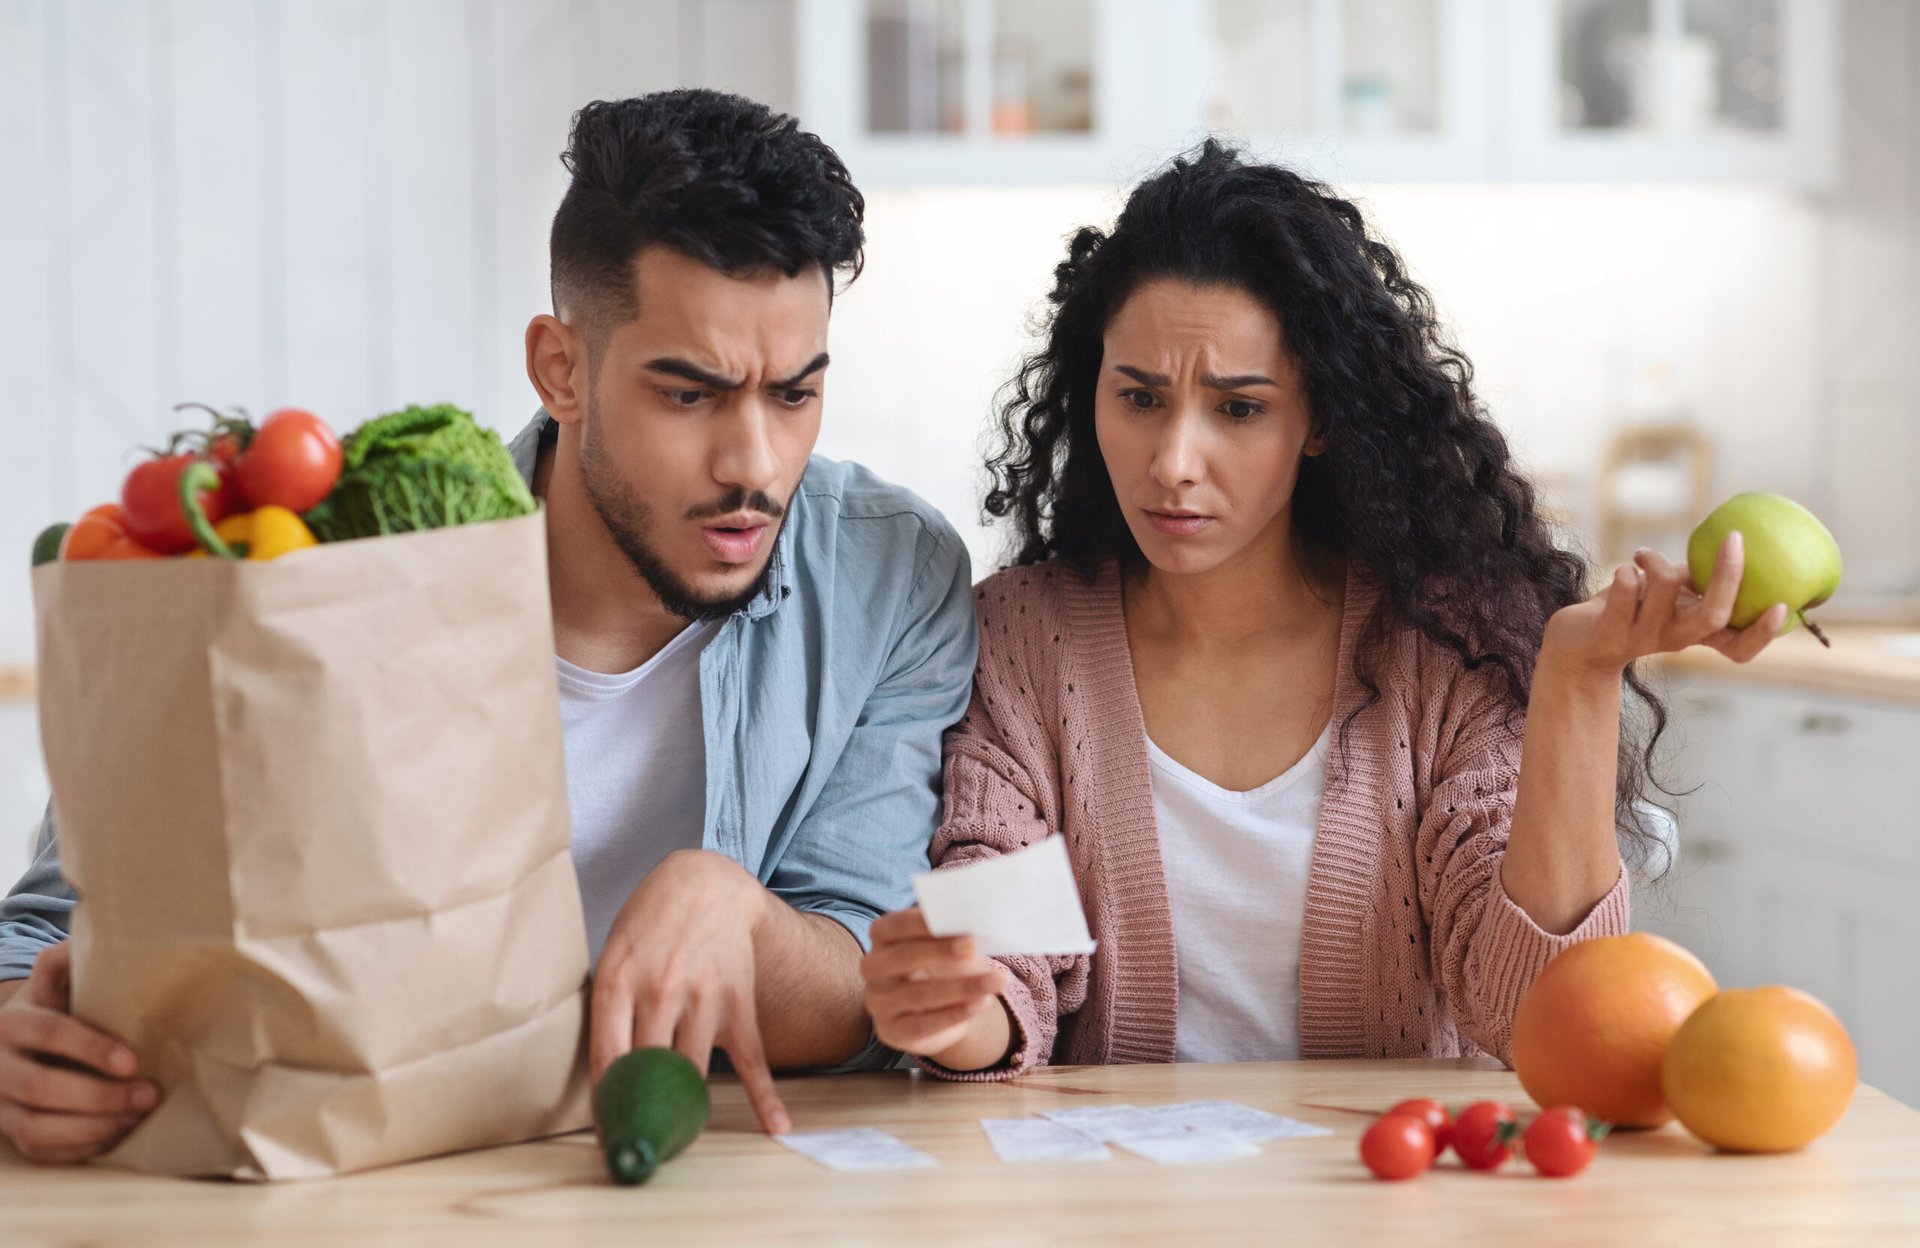 Shocked couple looks at their grocery bill